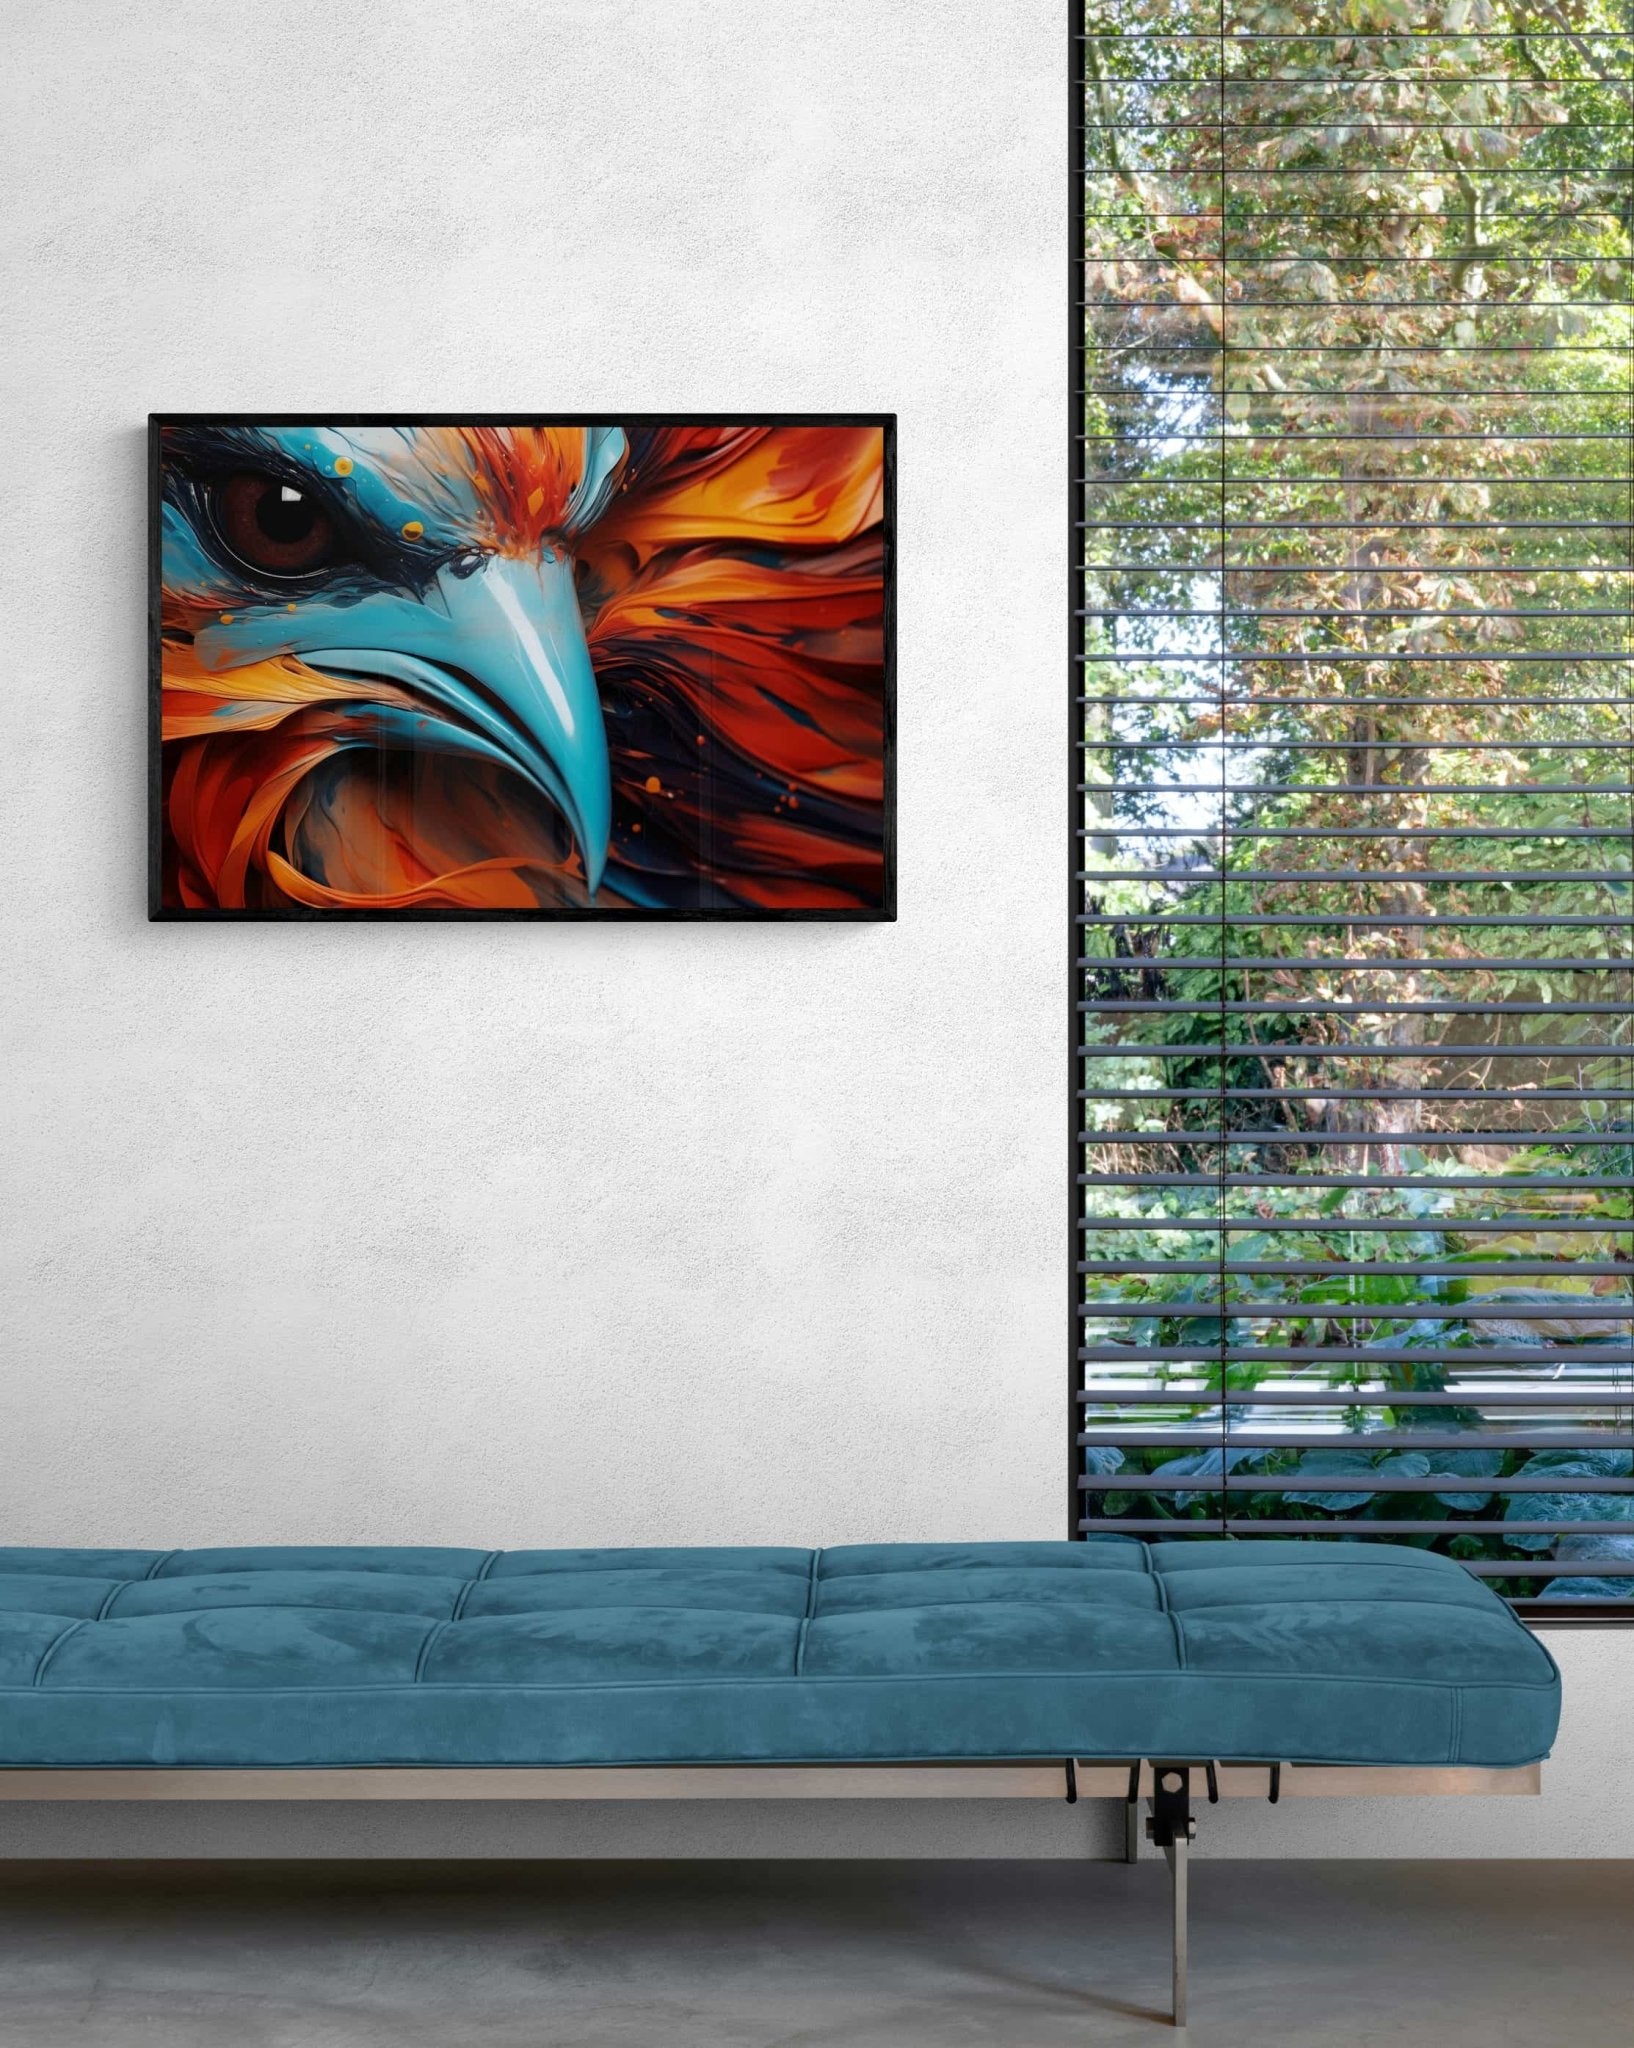 Intense and vivid framed canvas print of an eagle's gaze, with fiery orange feathers, by Milton Wes Art, mounted on a minimalist white wall above a sleek teal daybed, adding a powerful aesthetic to the room.